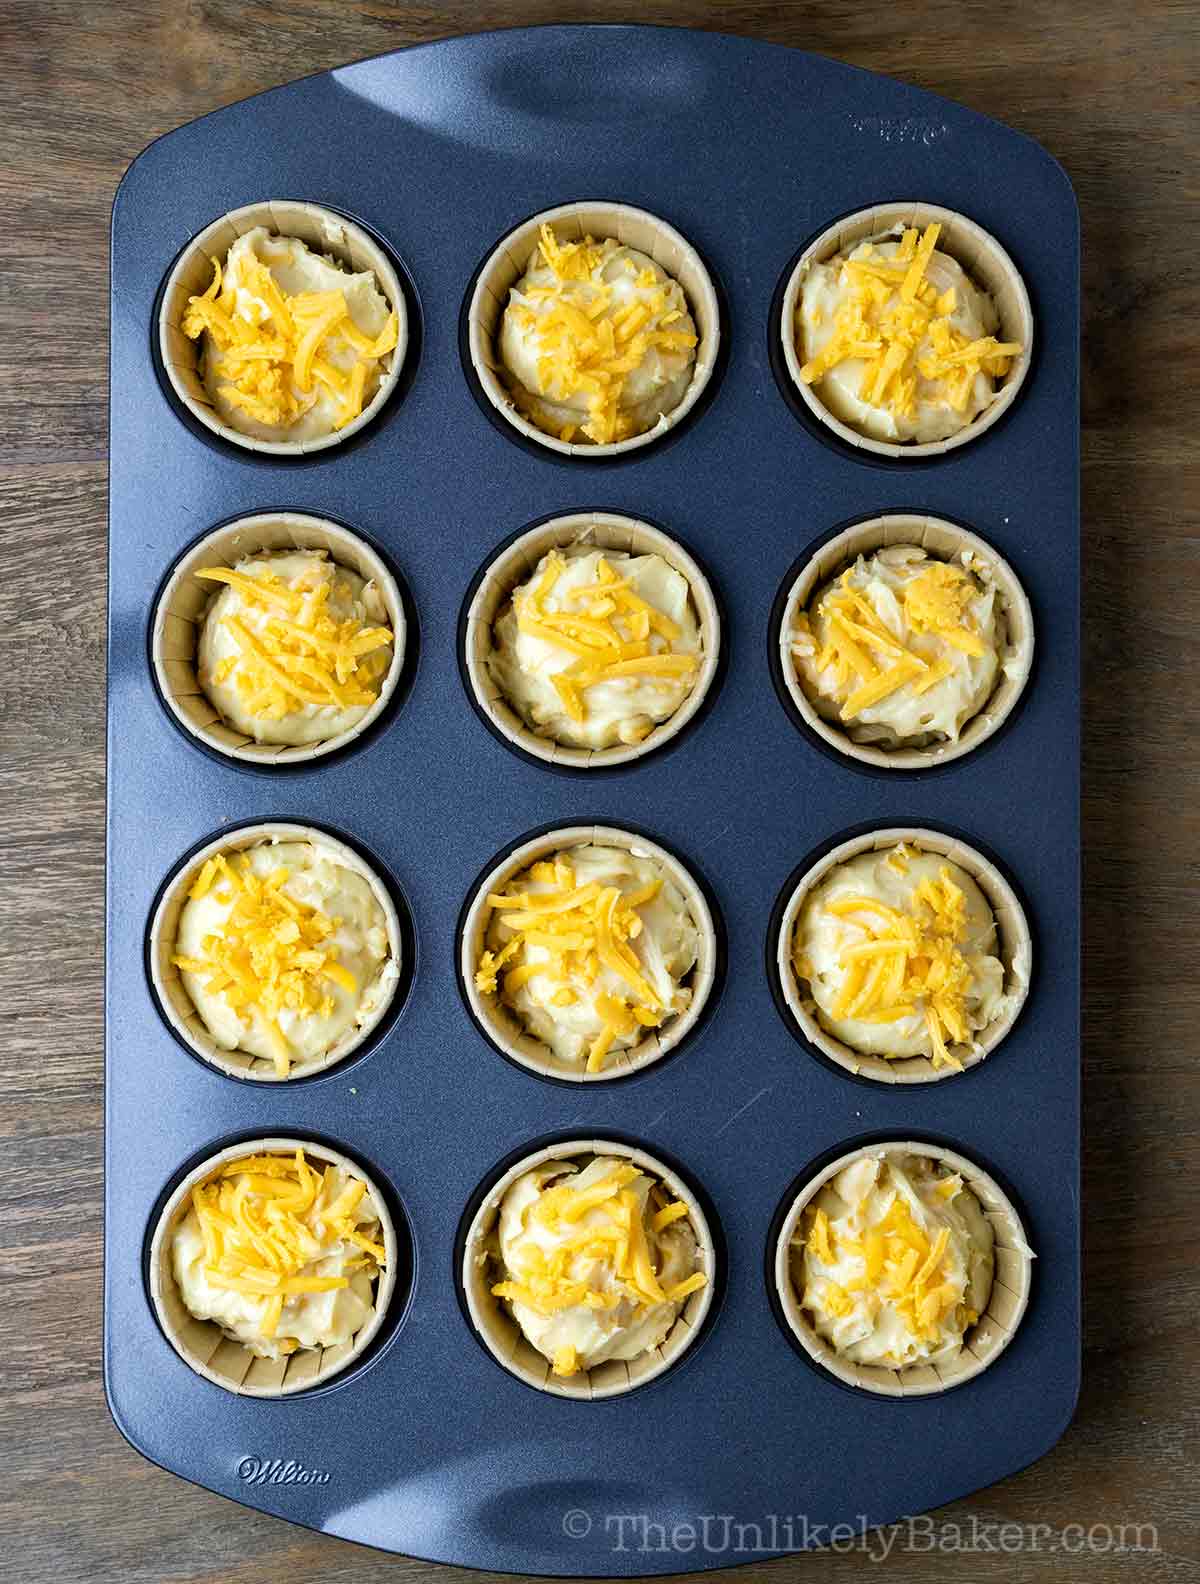 Cupcake batter sprinkled with cheddar cheese.